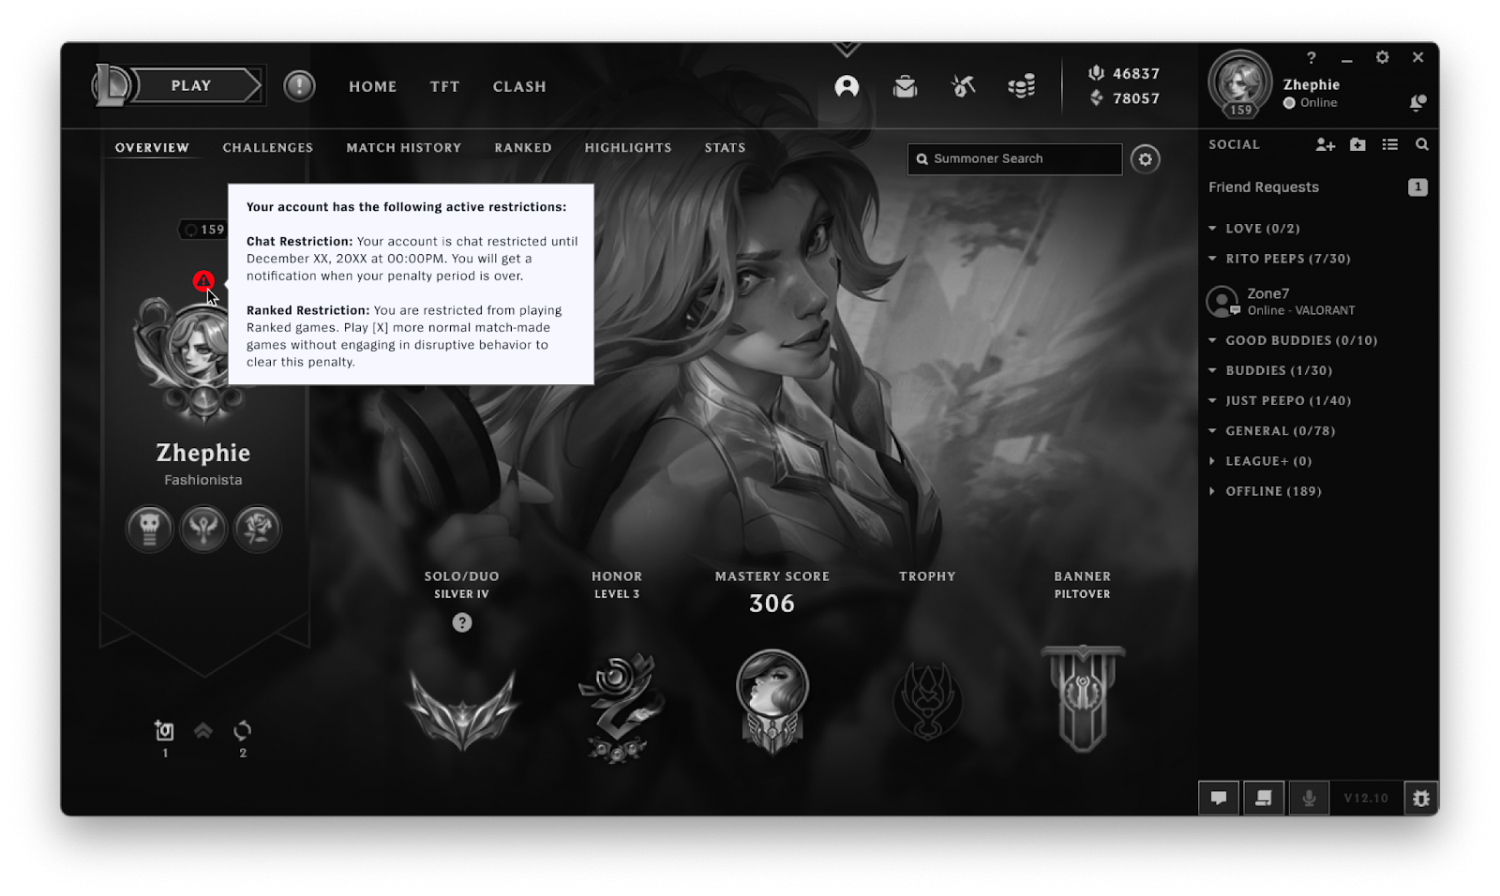 Toxic League of Legends Players to Be Kicked Out of Ranked Games, Riot Reveals in New Policy